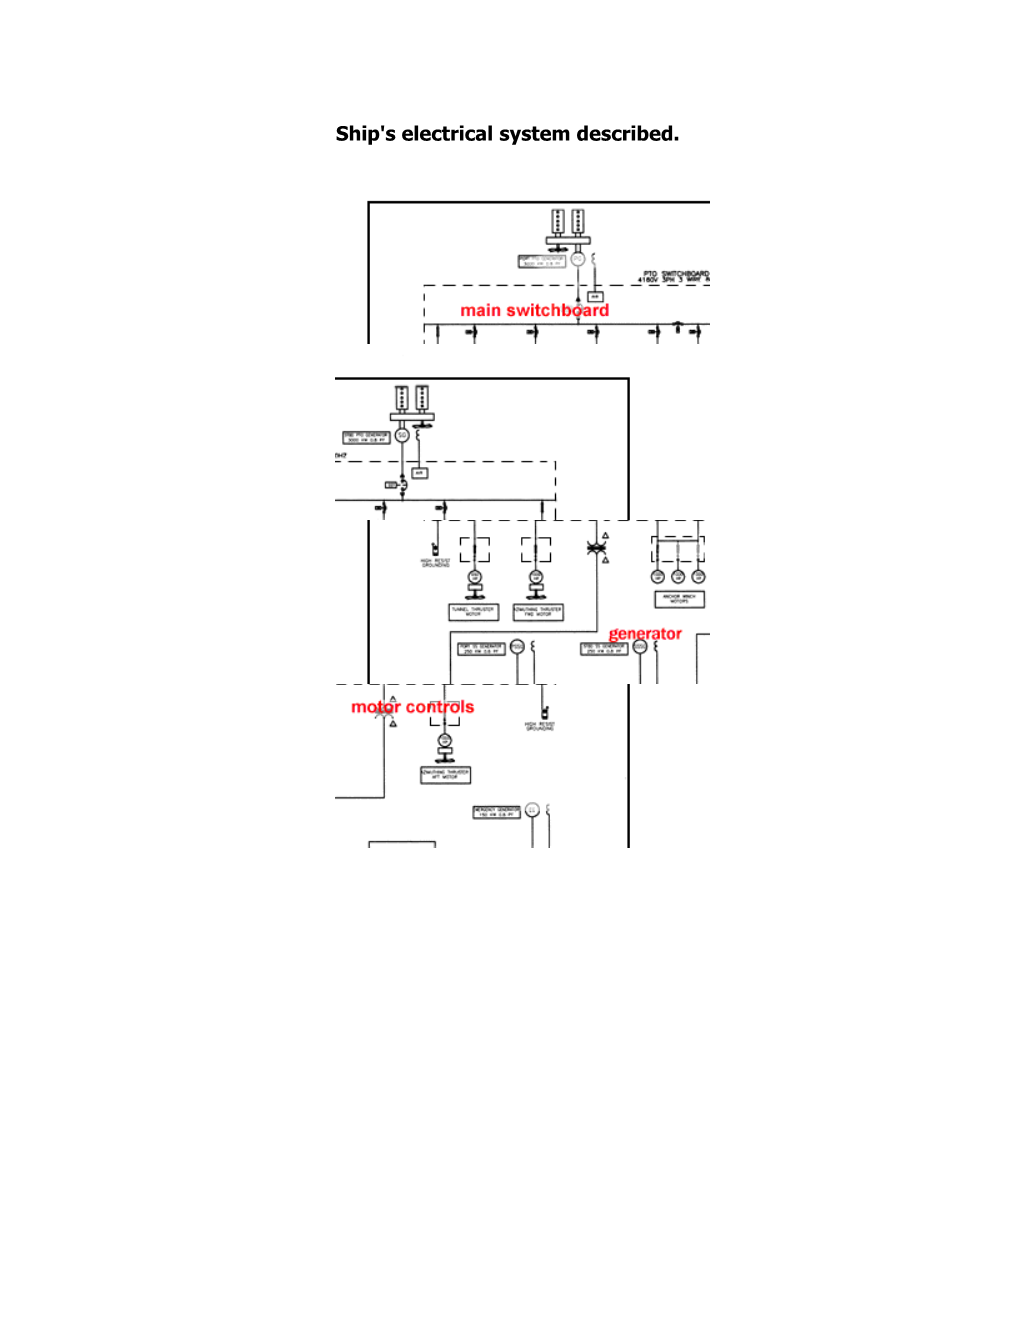 Ship's Electrical System Described